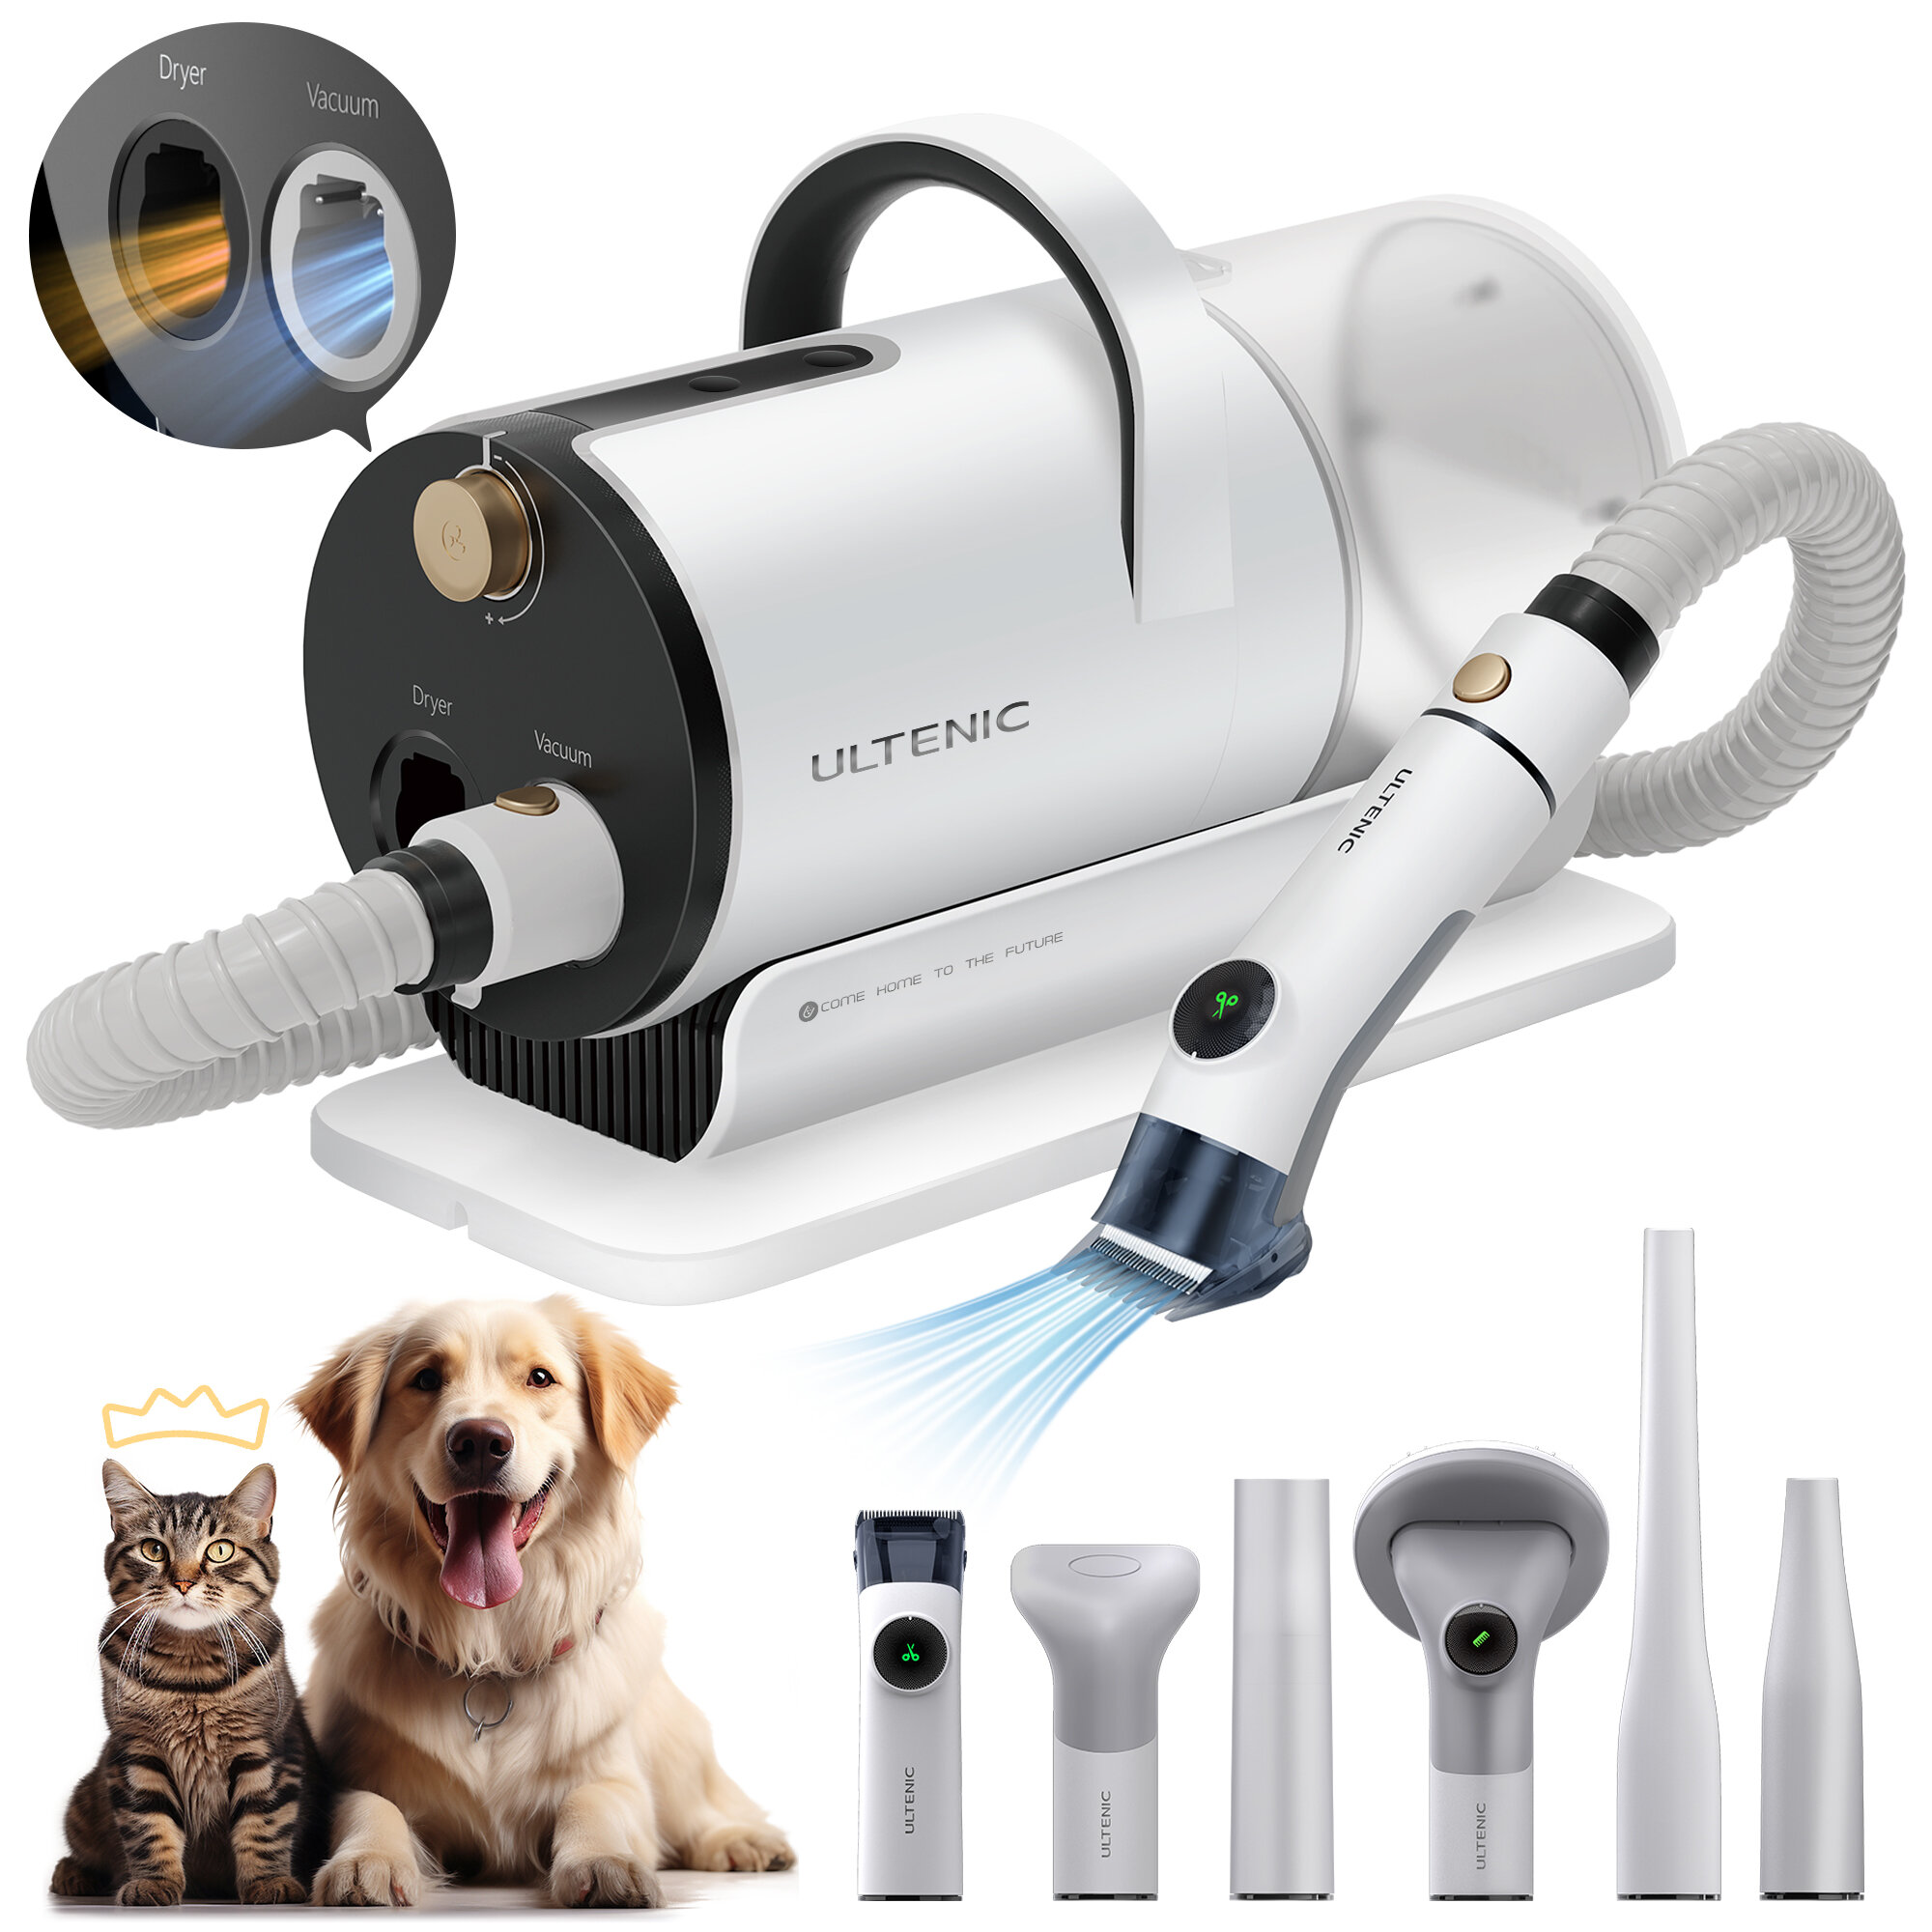 

[EU Direct] Ultenic P30 Combo Pet Grooming Vacuum & Drying kit with 2L Capacity Dust Cup, Low Noise 6 in 1 Grooming Kit